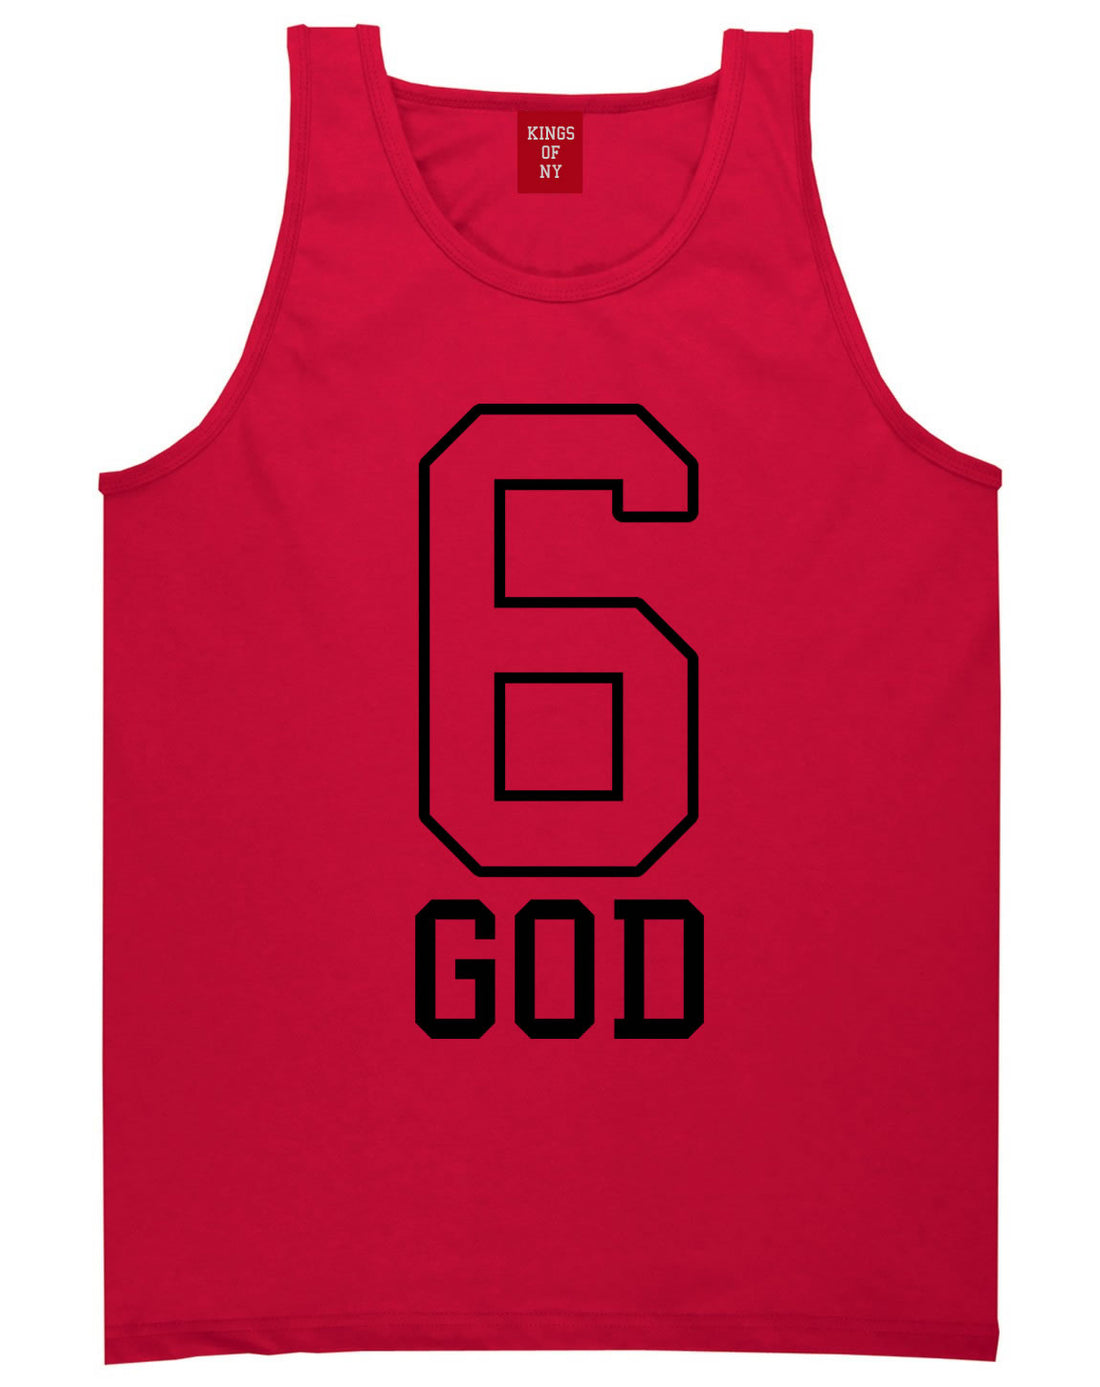 Six 6 God Tank Top in Red By Kings Of NY